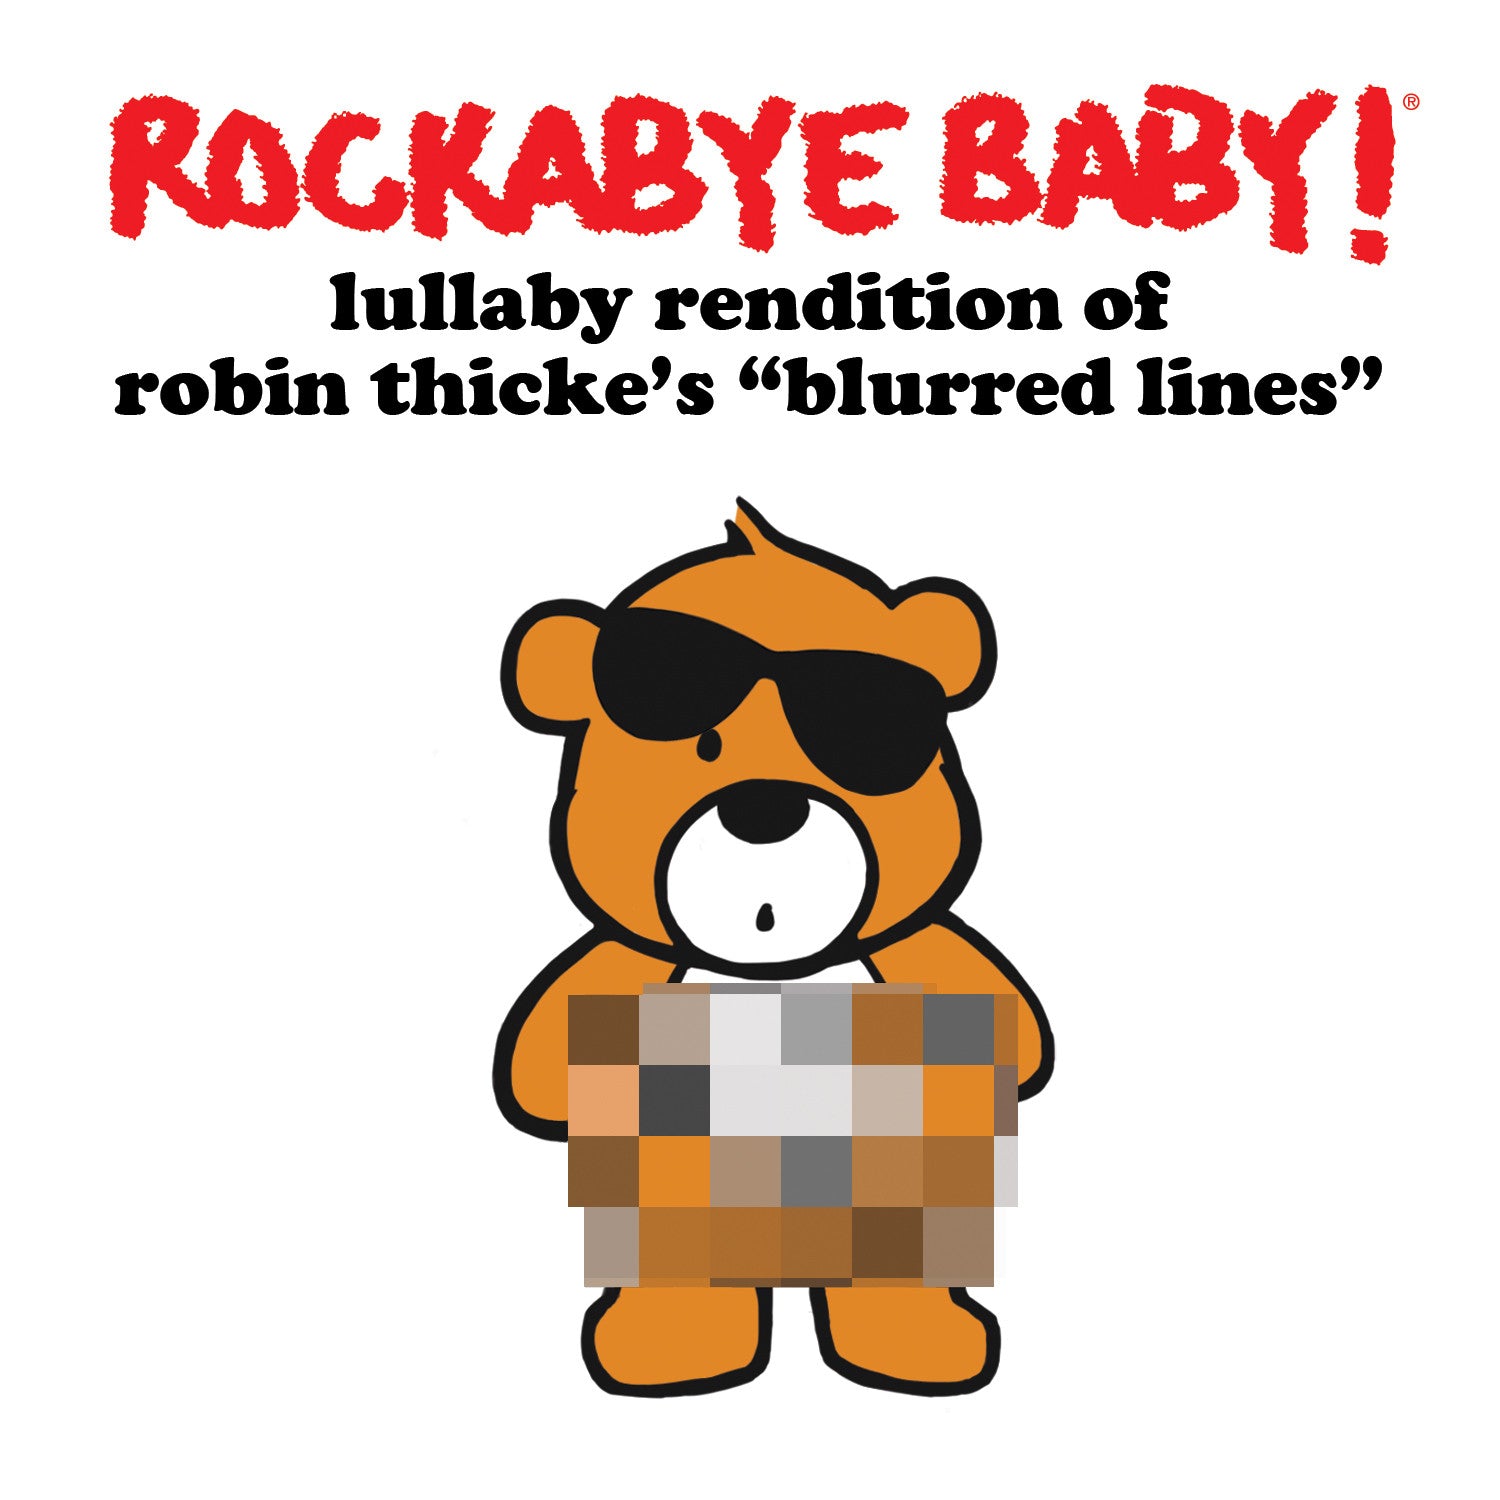 rockabye baby lullaby rendition robin thick blurred lines